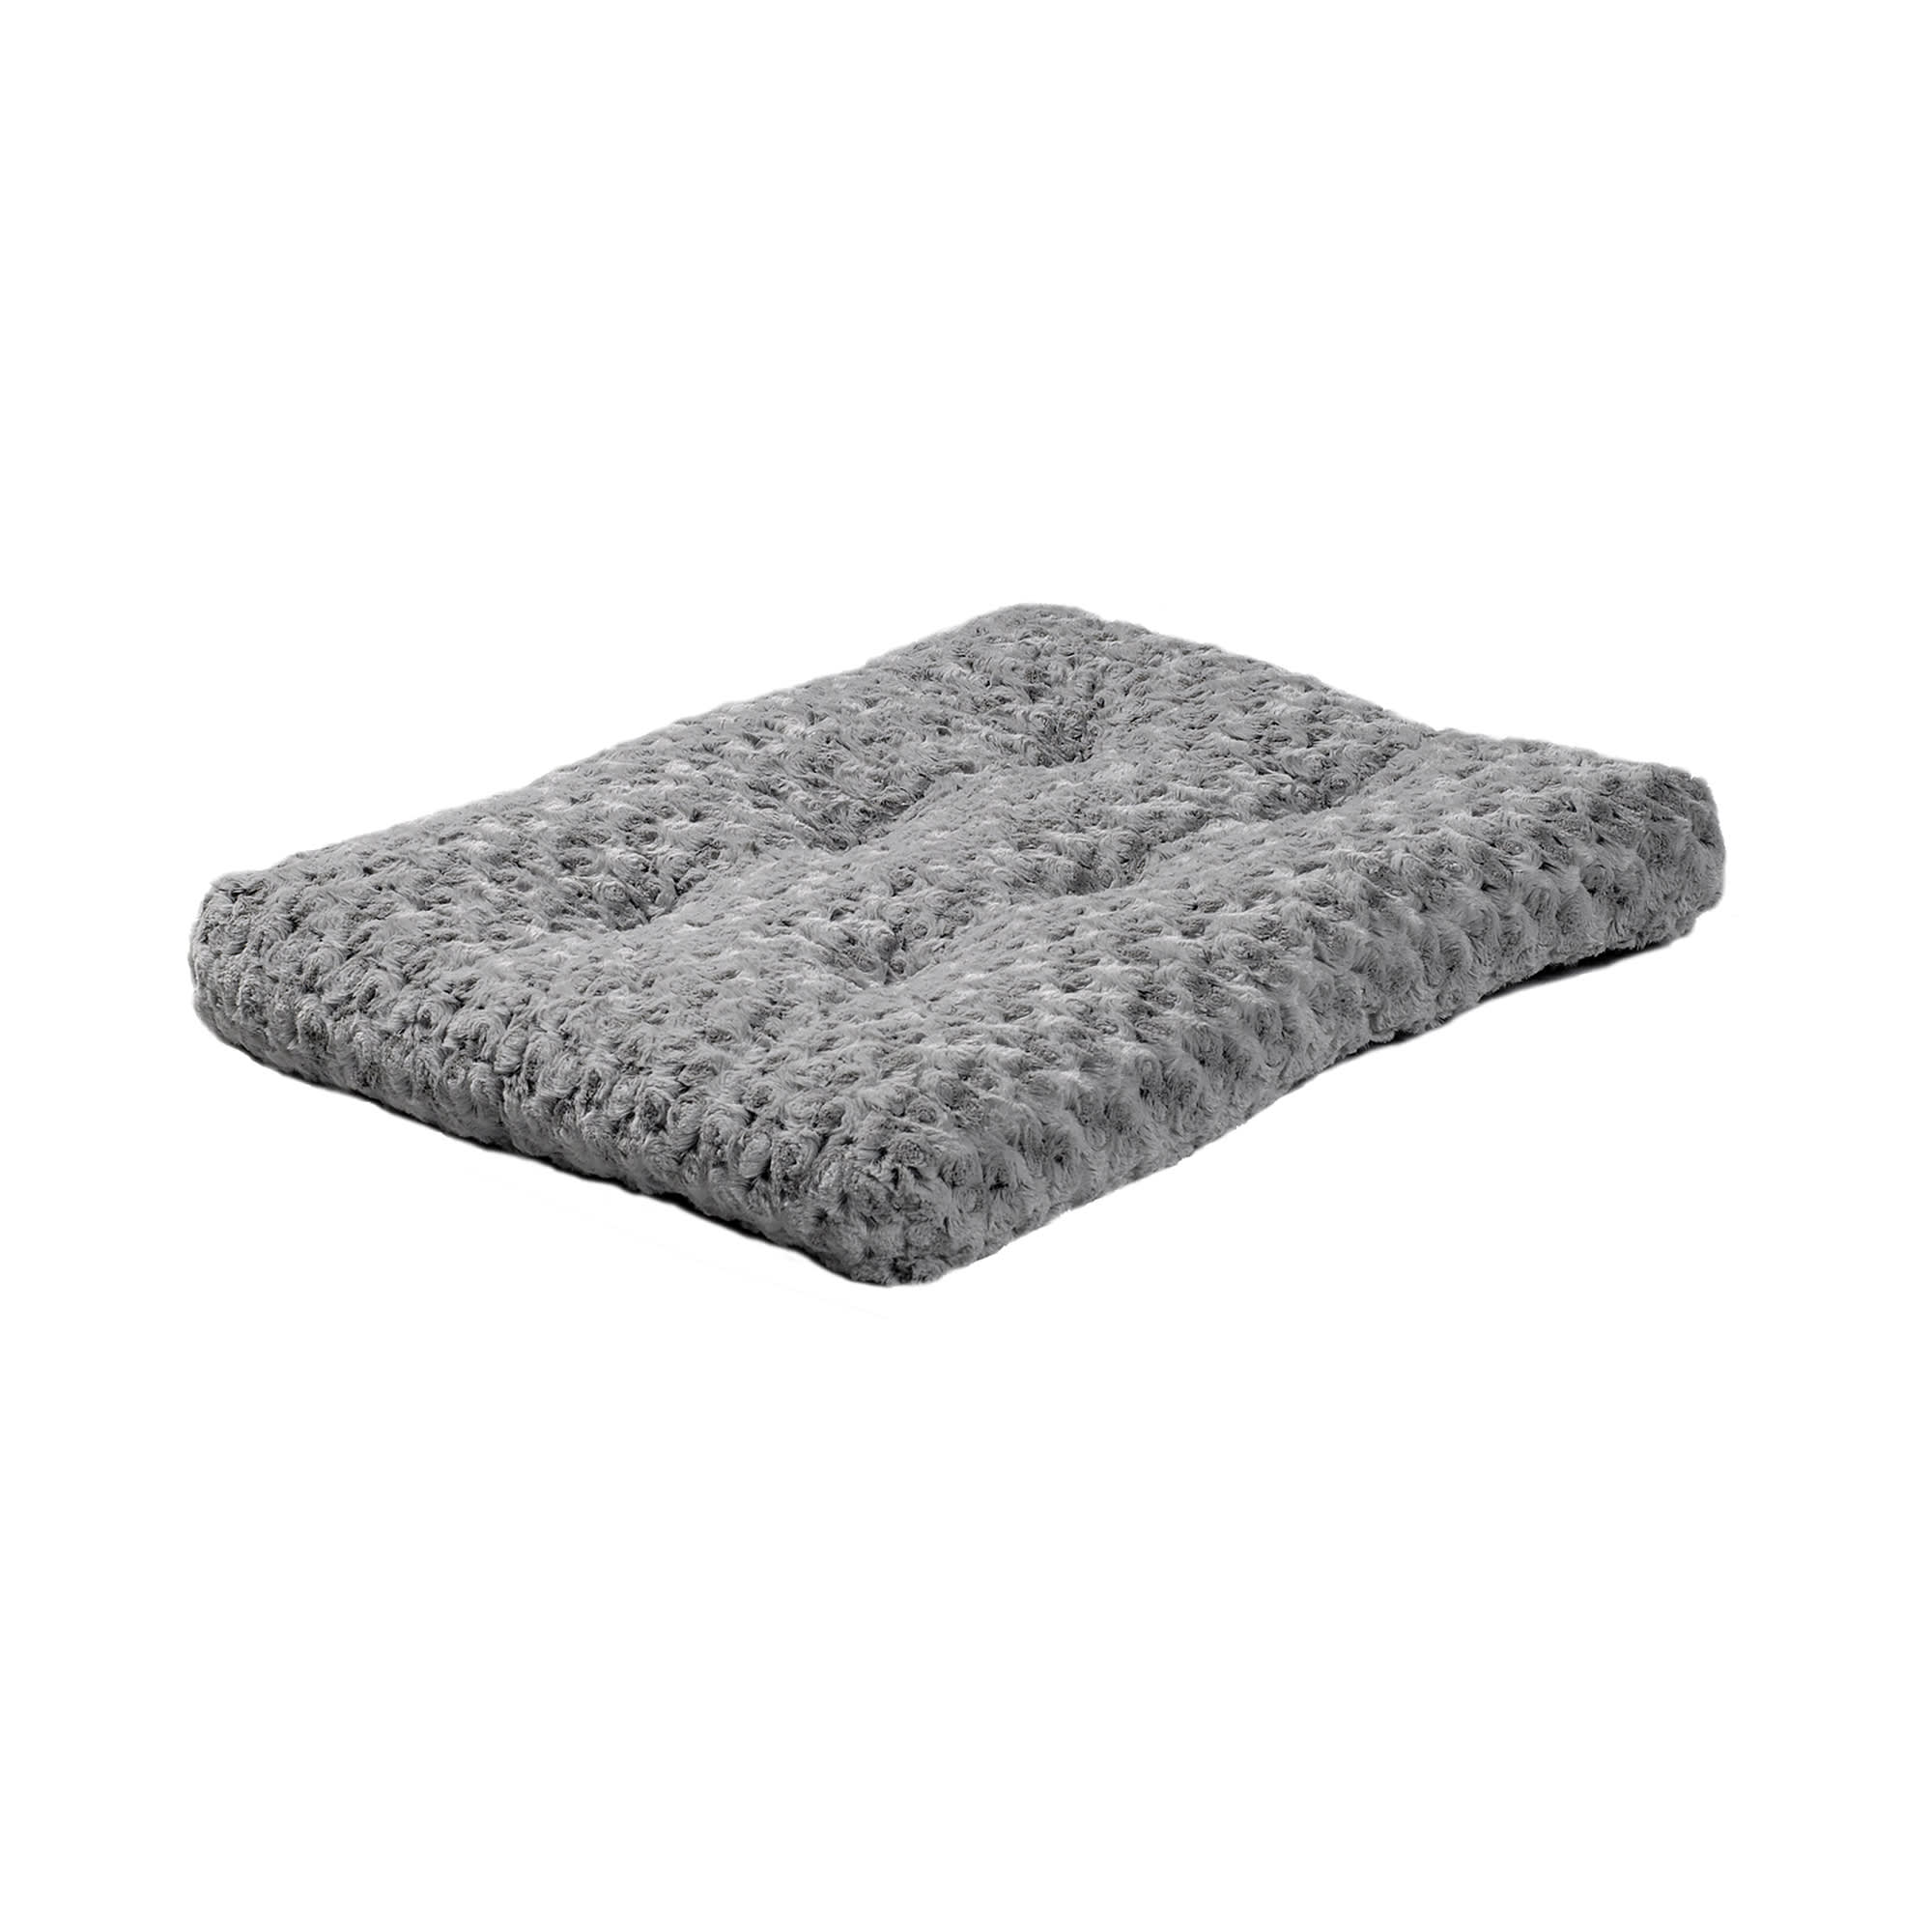 Photos - Bed & Furniture Midwest Quiet Time Ombre Gray Dog Bed, 22" L X 17" W, Small, Gray 